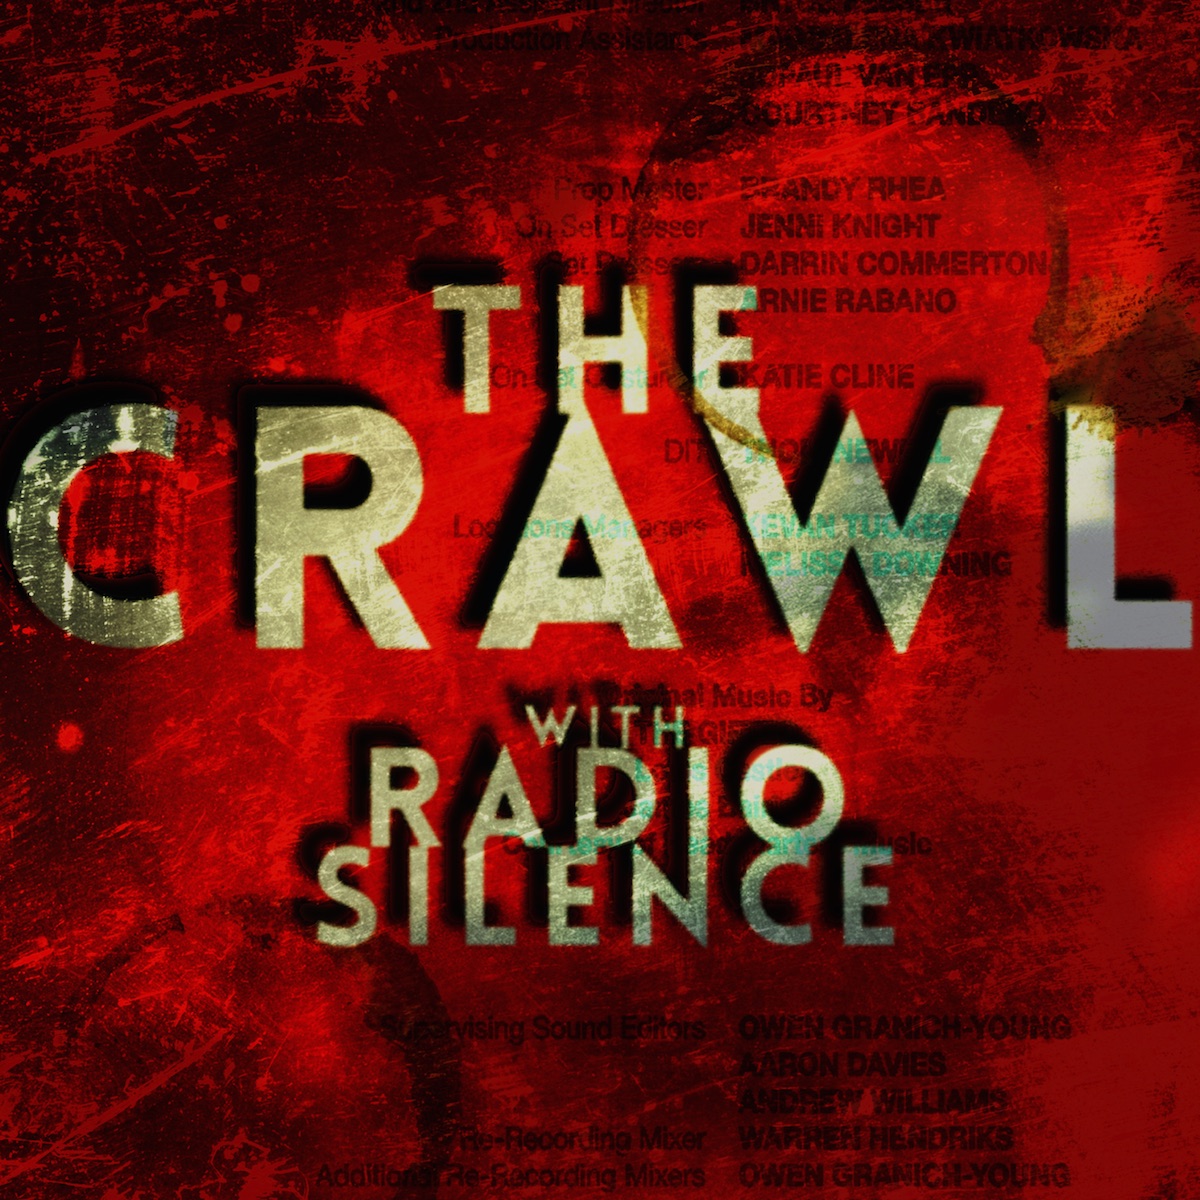 Welcome to the Crawl with Radio Silence